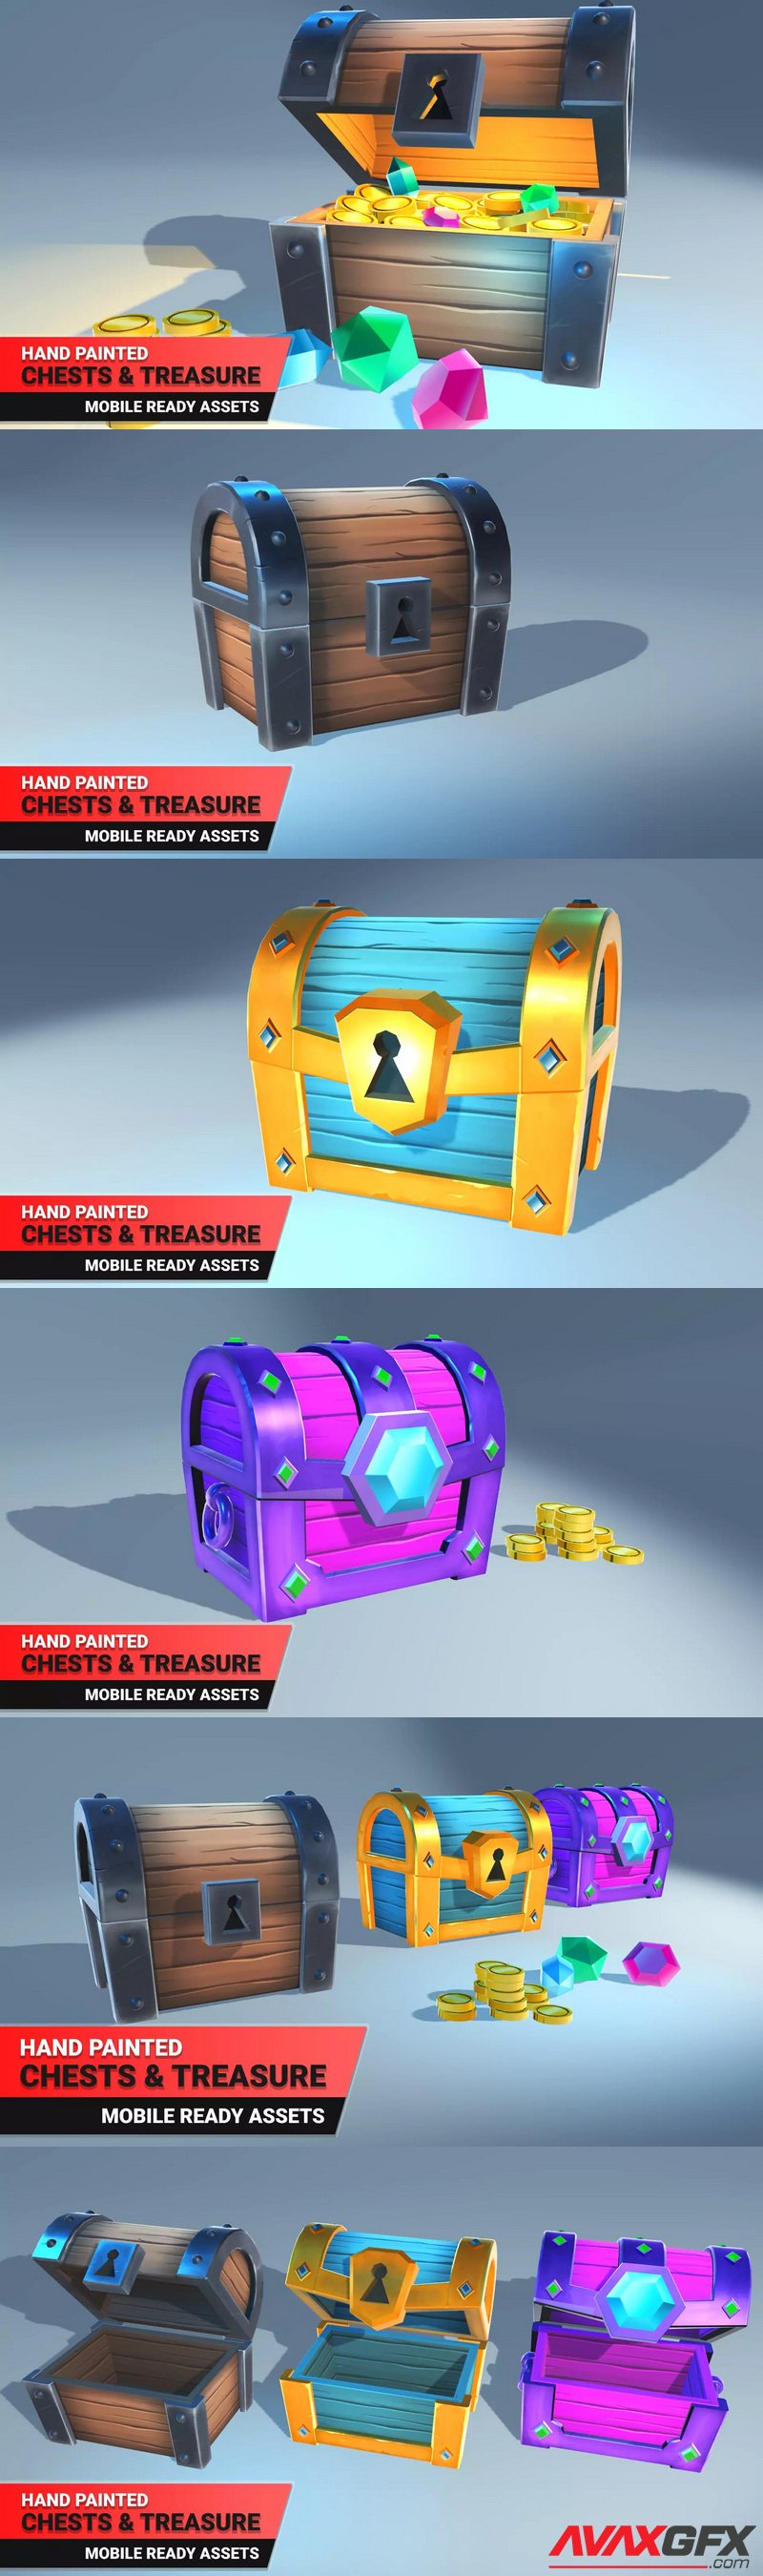 Hand Painted Chests & Treasure | Download 3D Assets, Models for Game Design